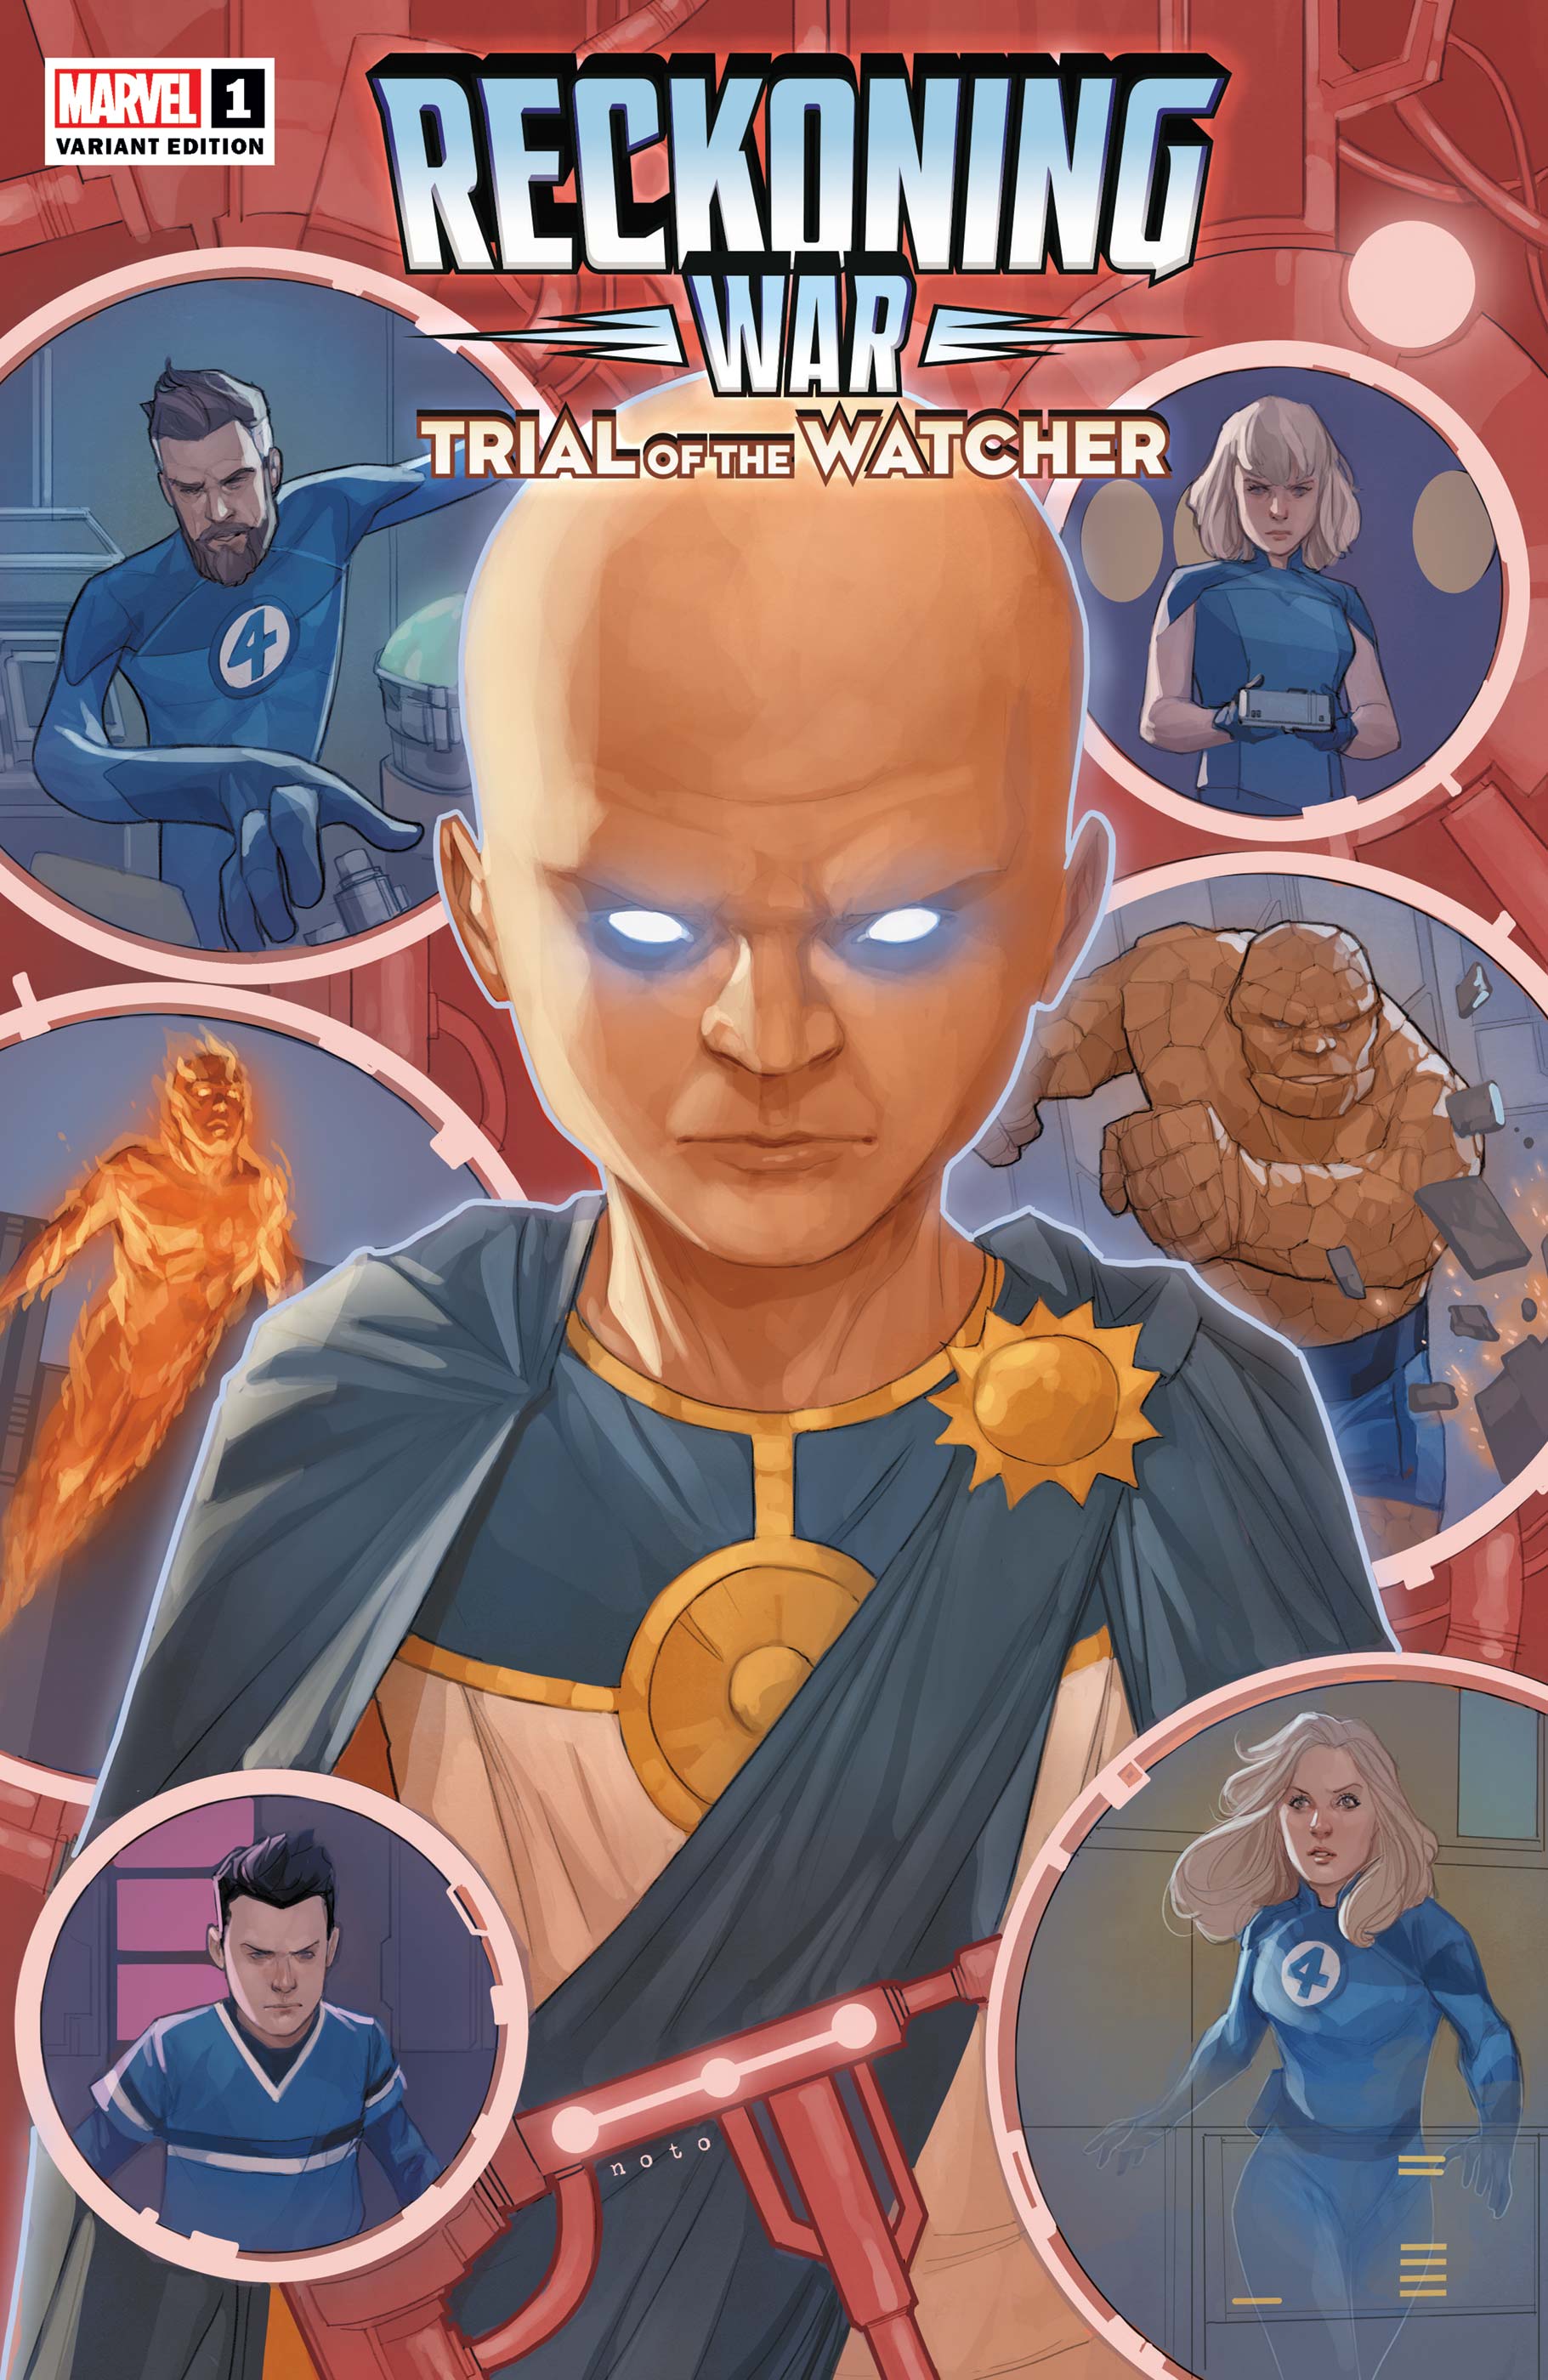 Fantastic Four - Trial of the Watcher - a Marvel Reckoning War